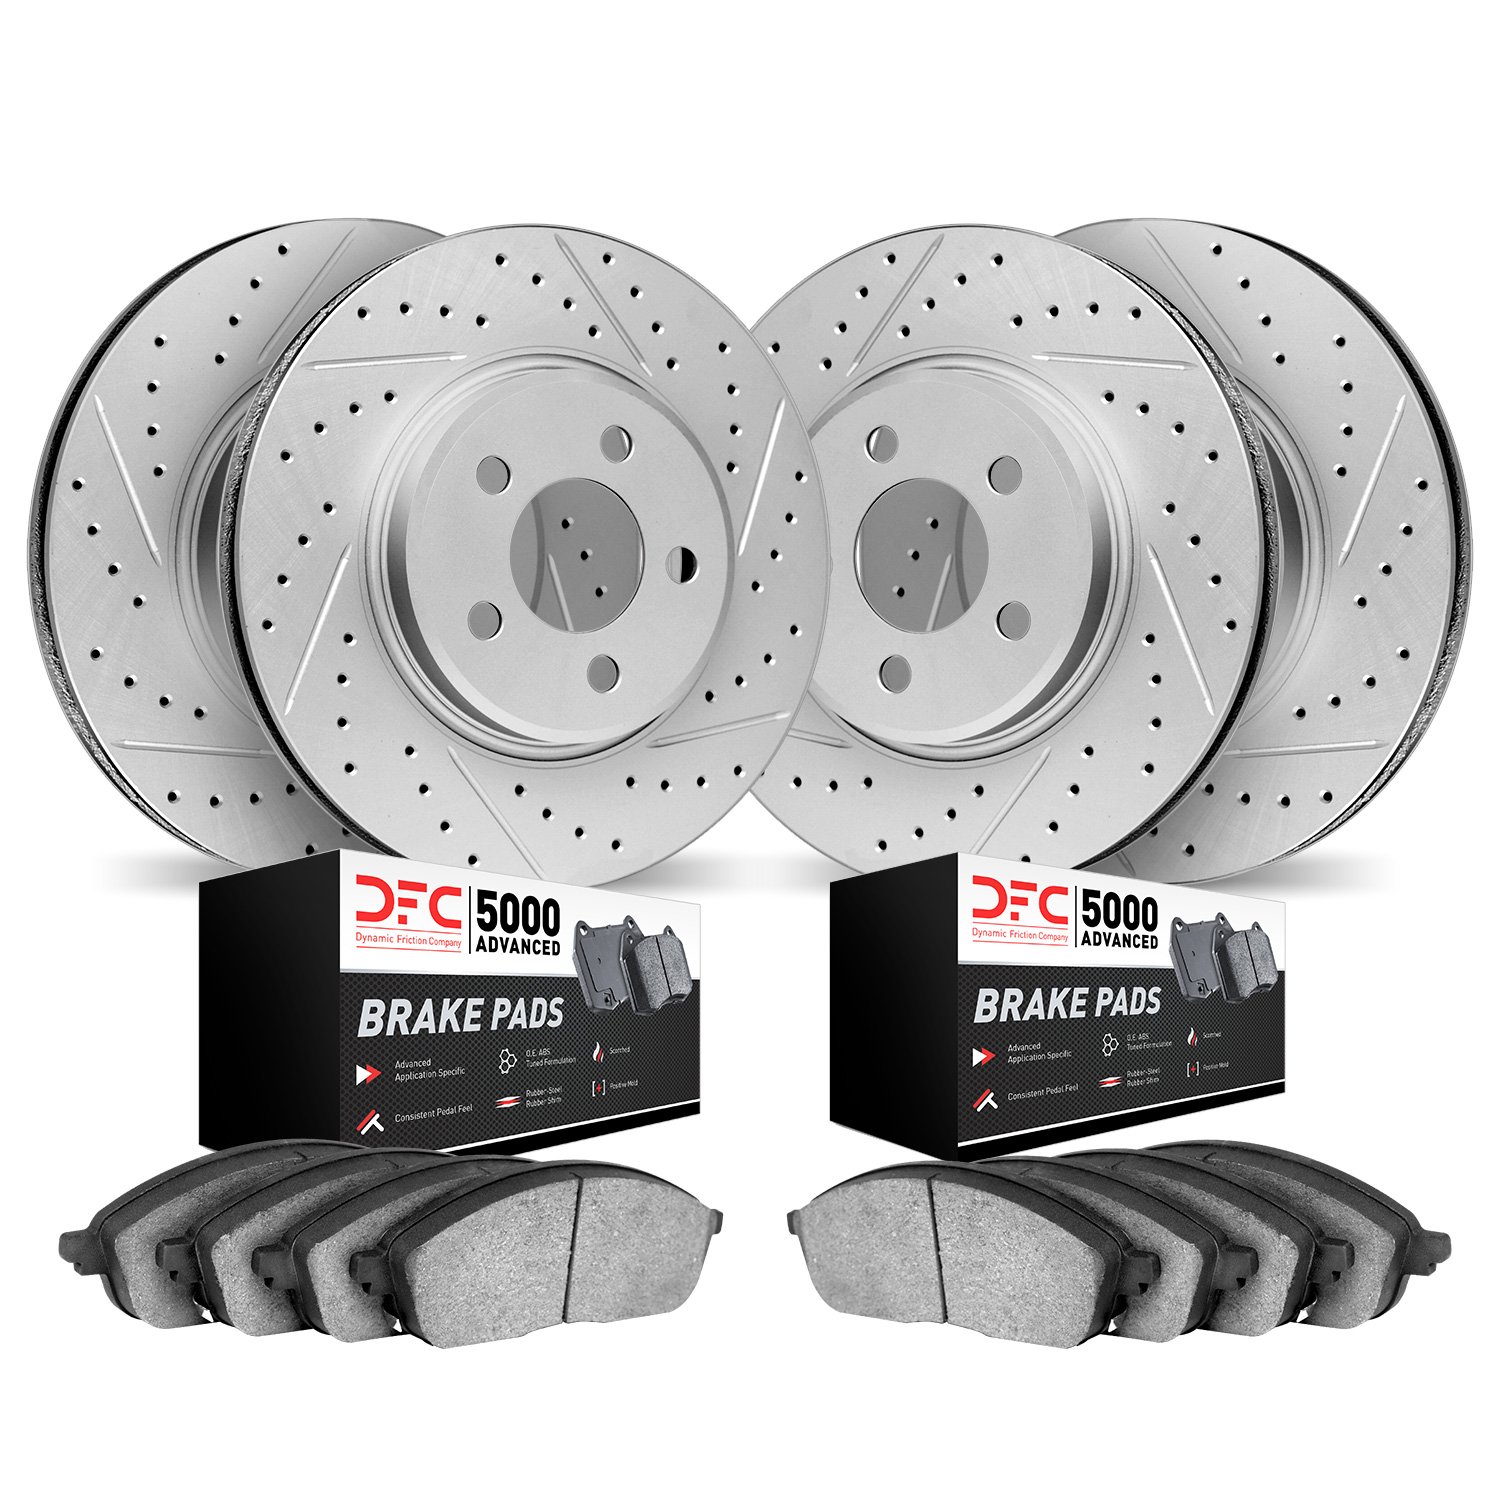 2504-54296 Geoperformance Drilled/Slotted Rotors w/5000 Advanced Brake Pads Kit, 2013-2019 Ford/Lincoln/Mercury/Mazda, Position: